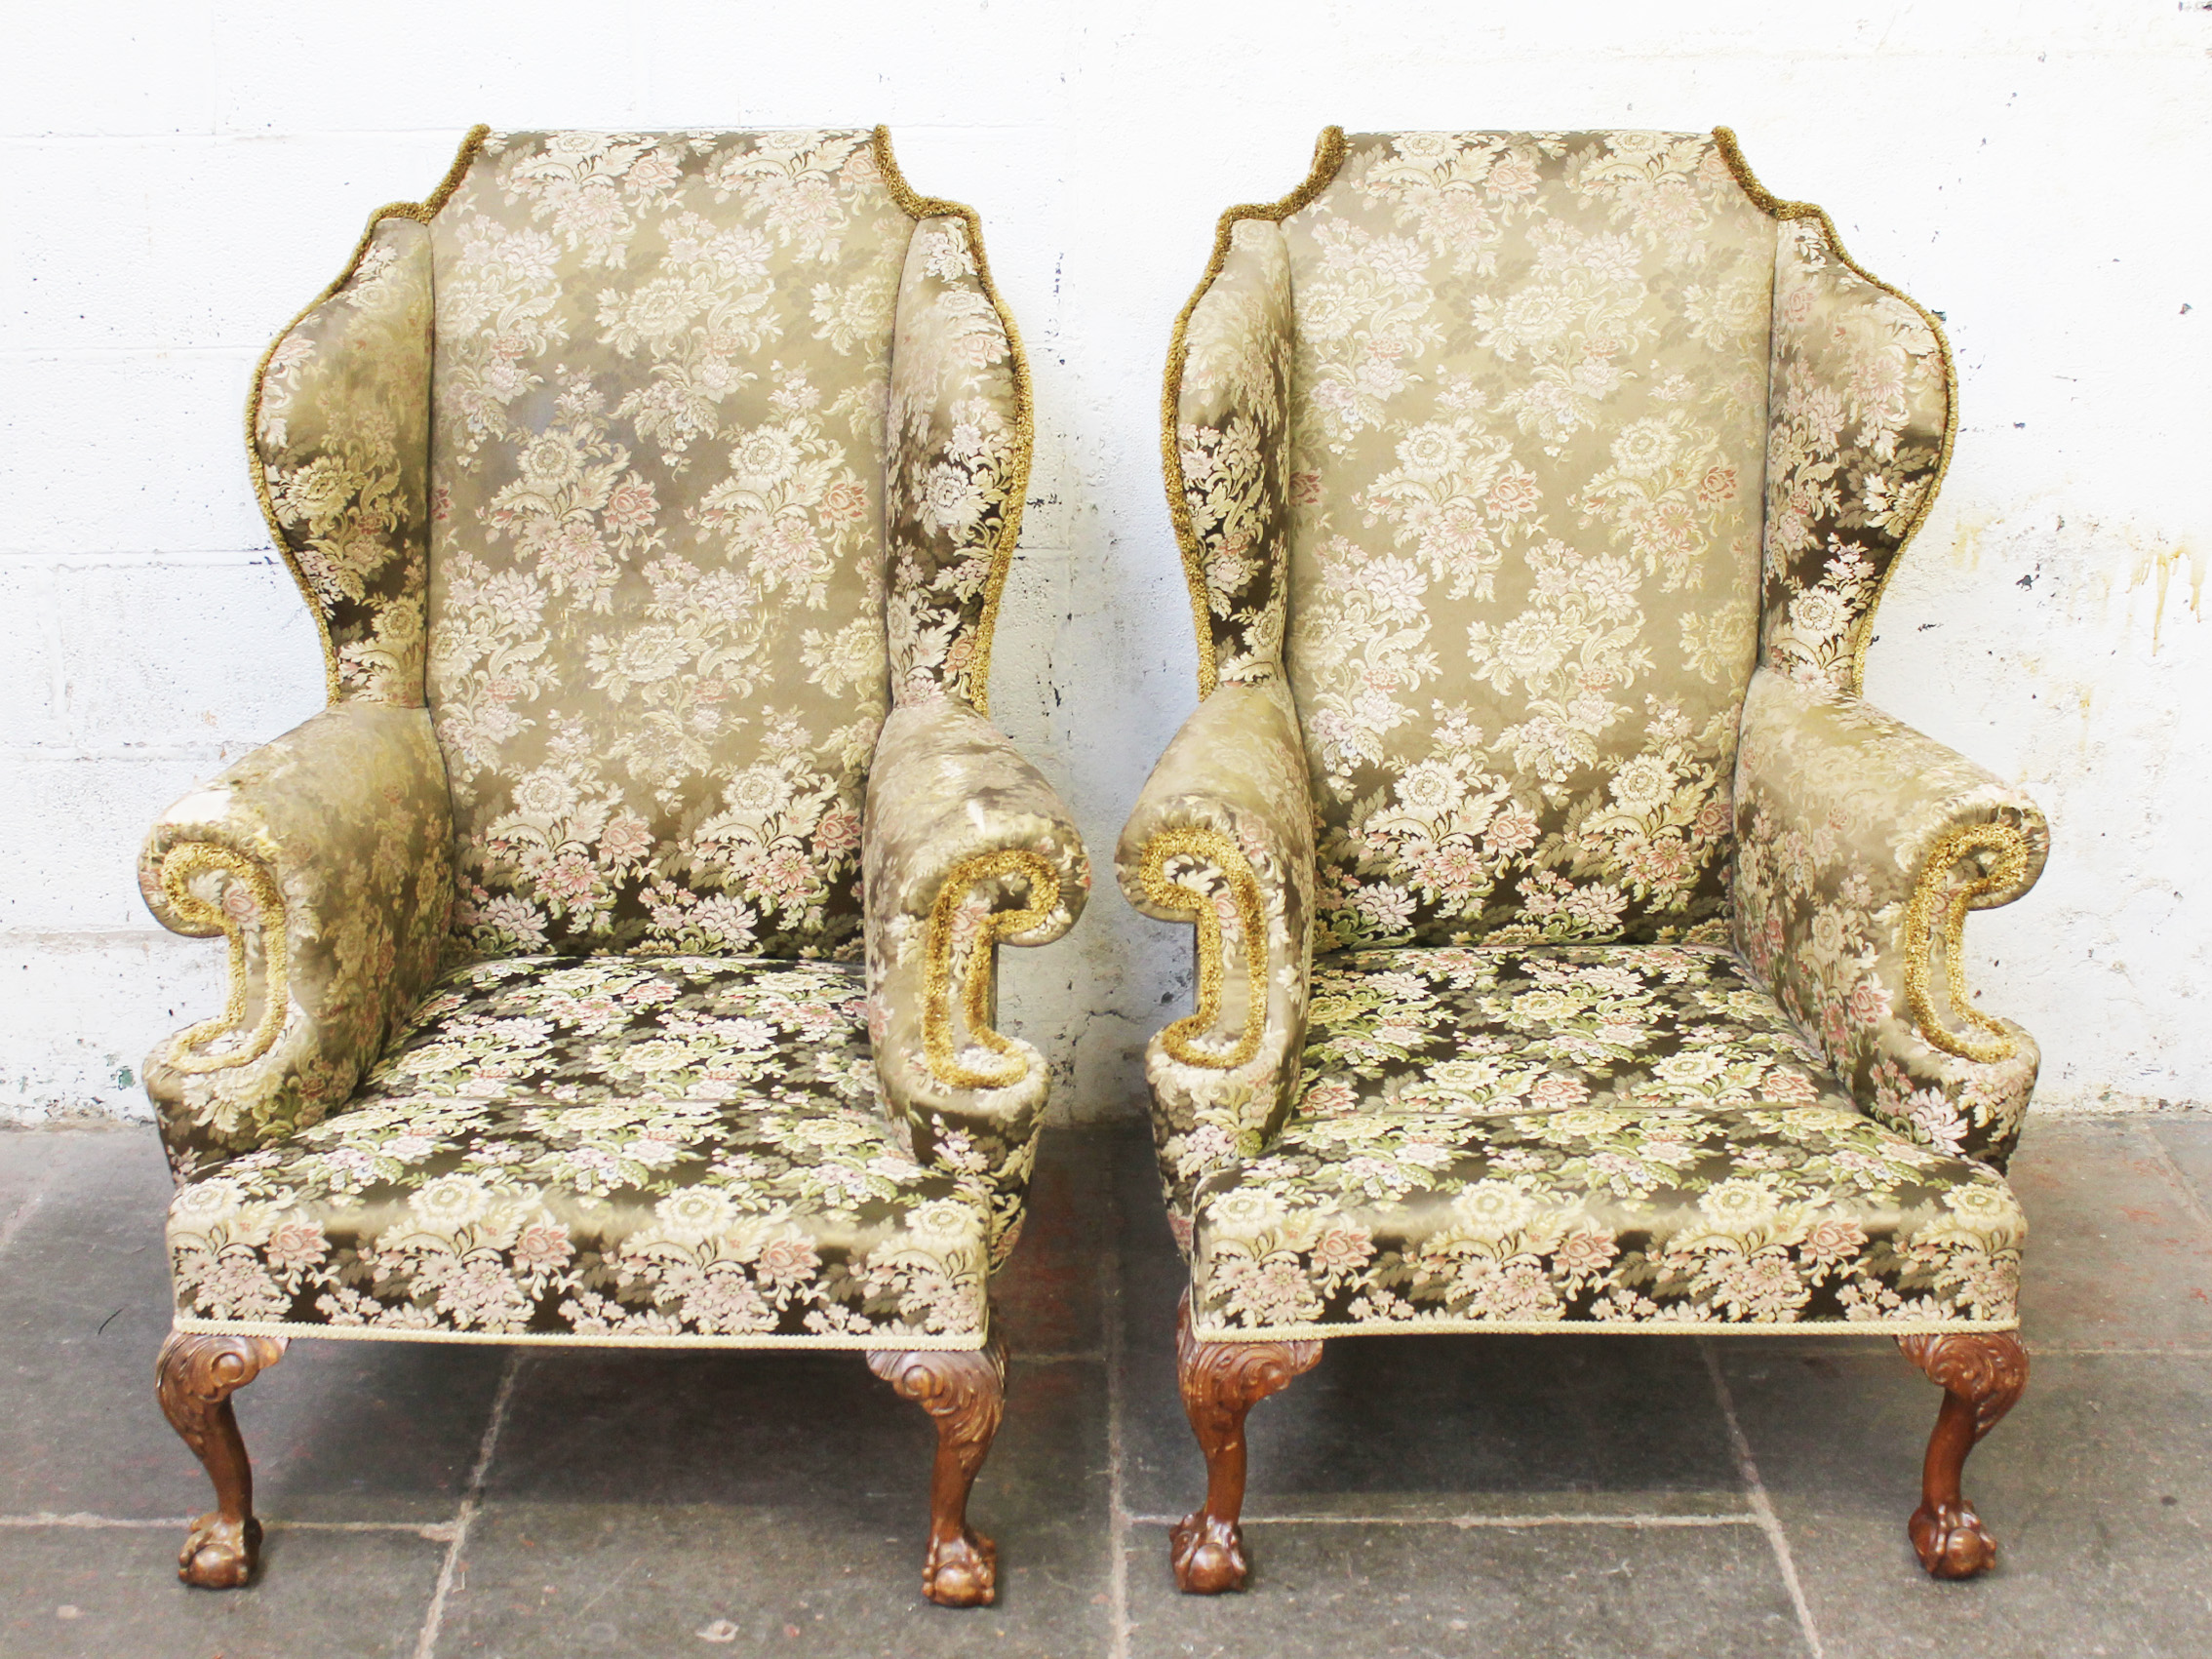 A pair of Queen Anne style winged back chairs. H116cm